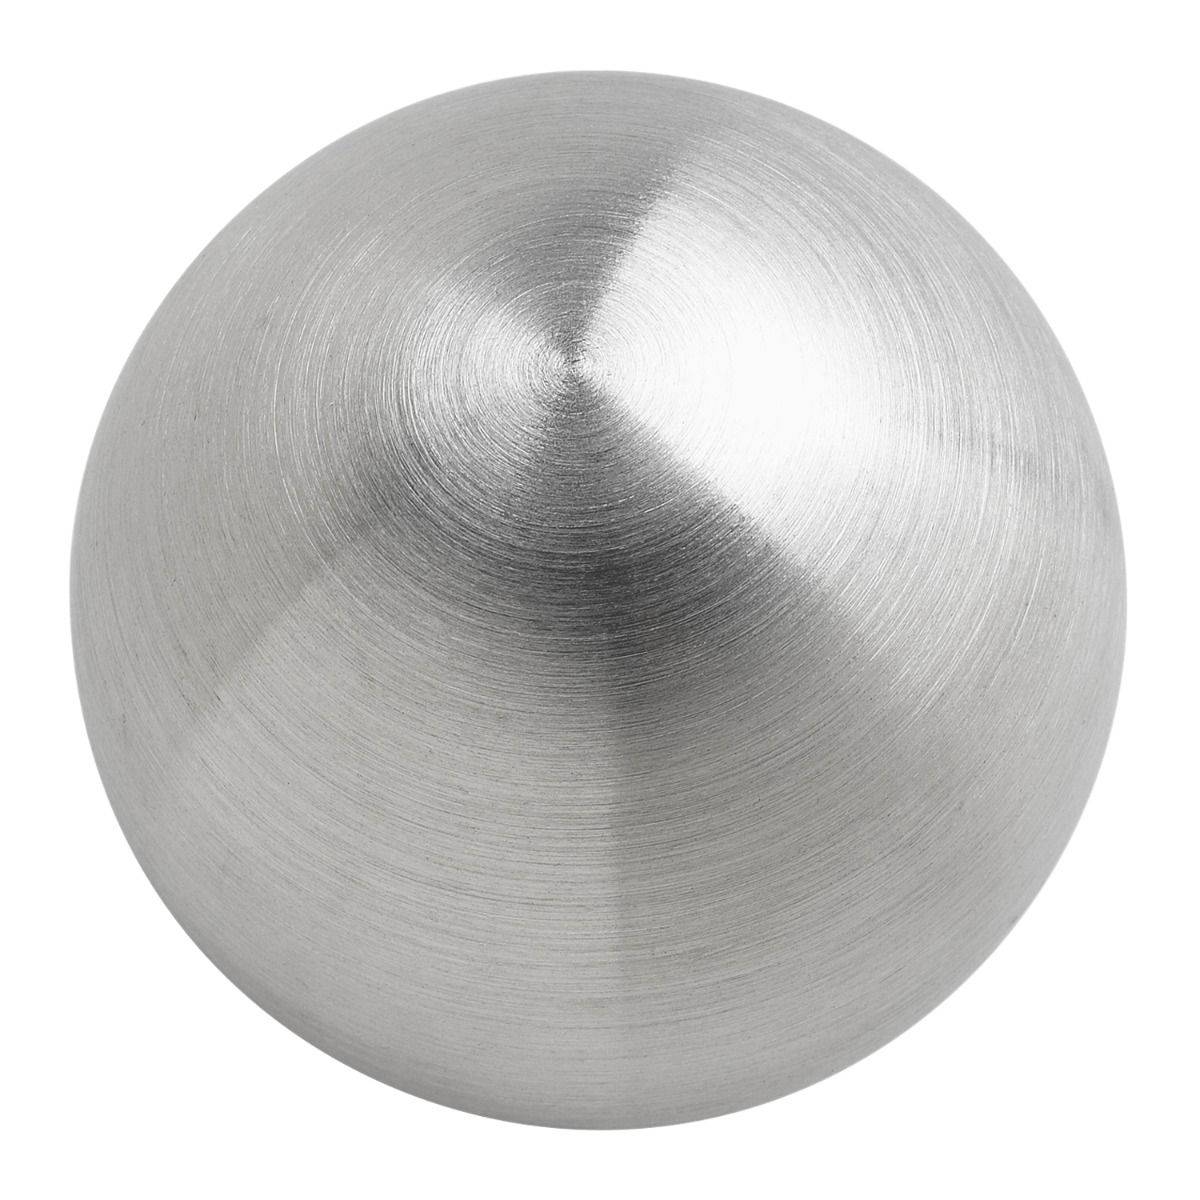 Gill Athletics 'Pacer" Stainless Steel Shot